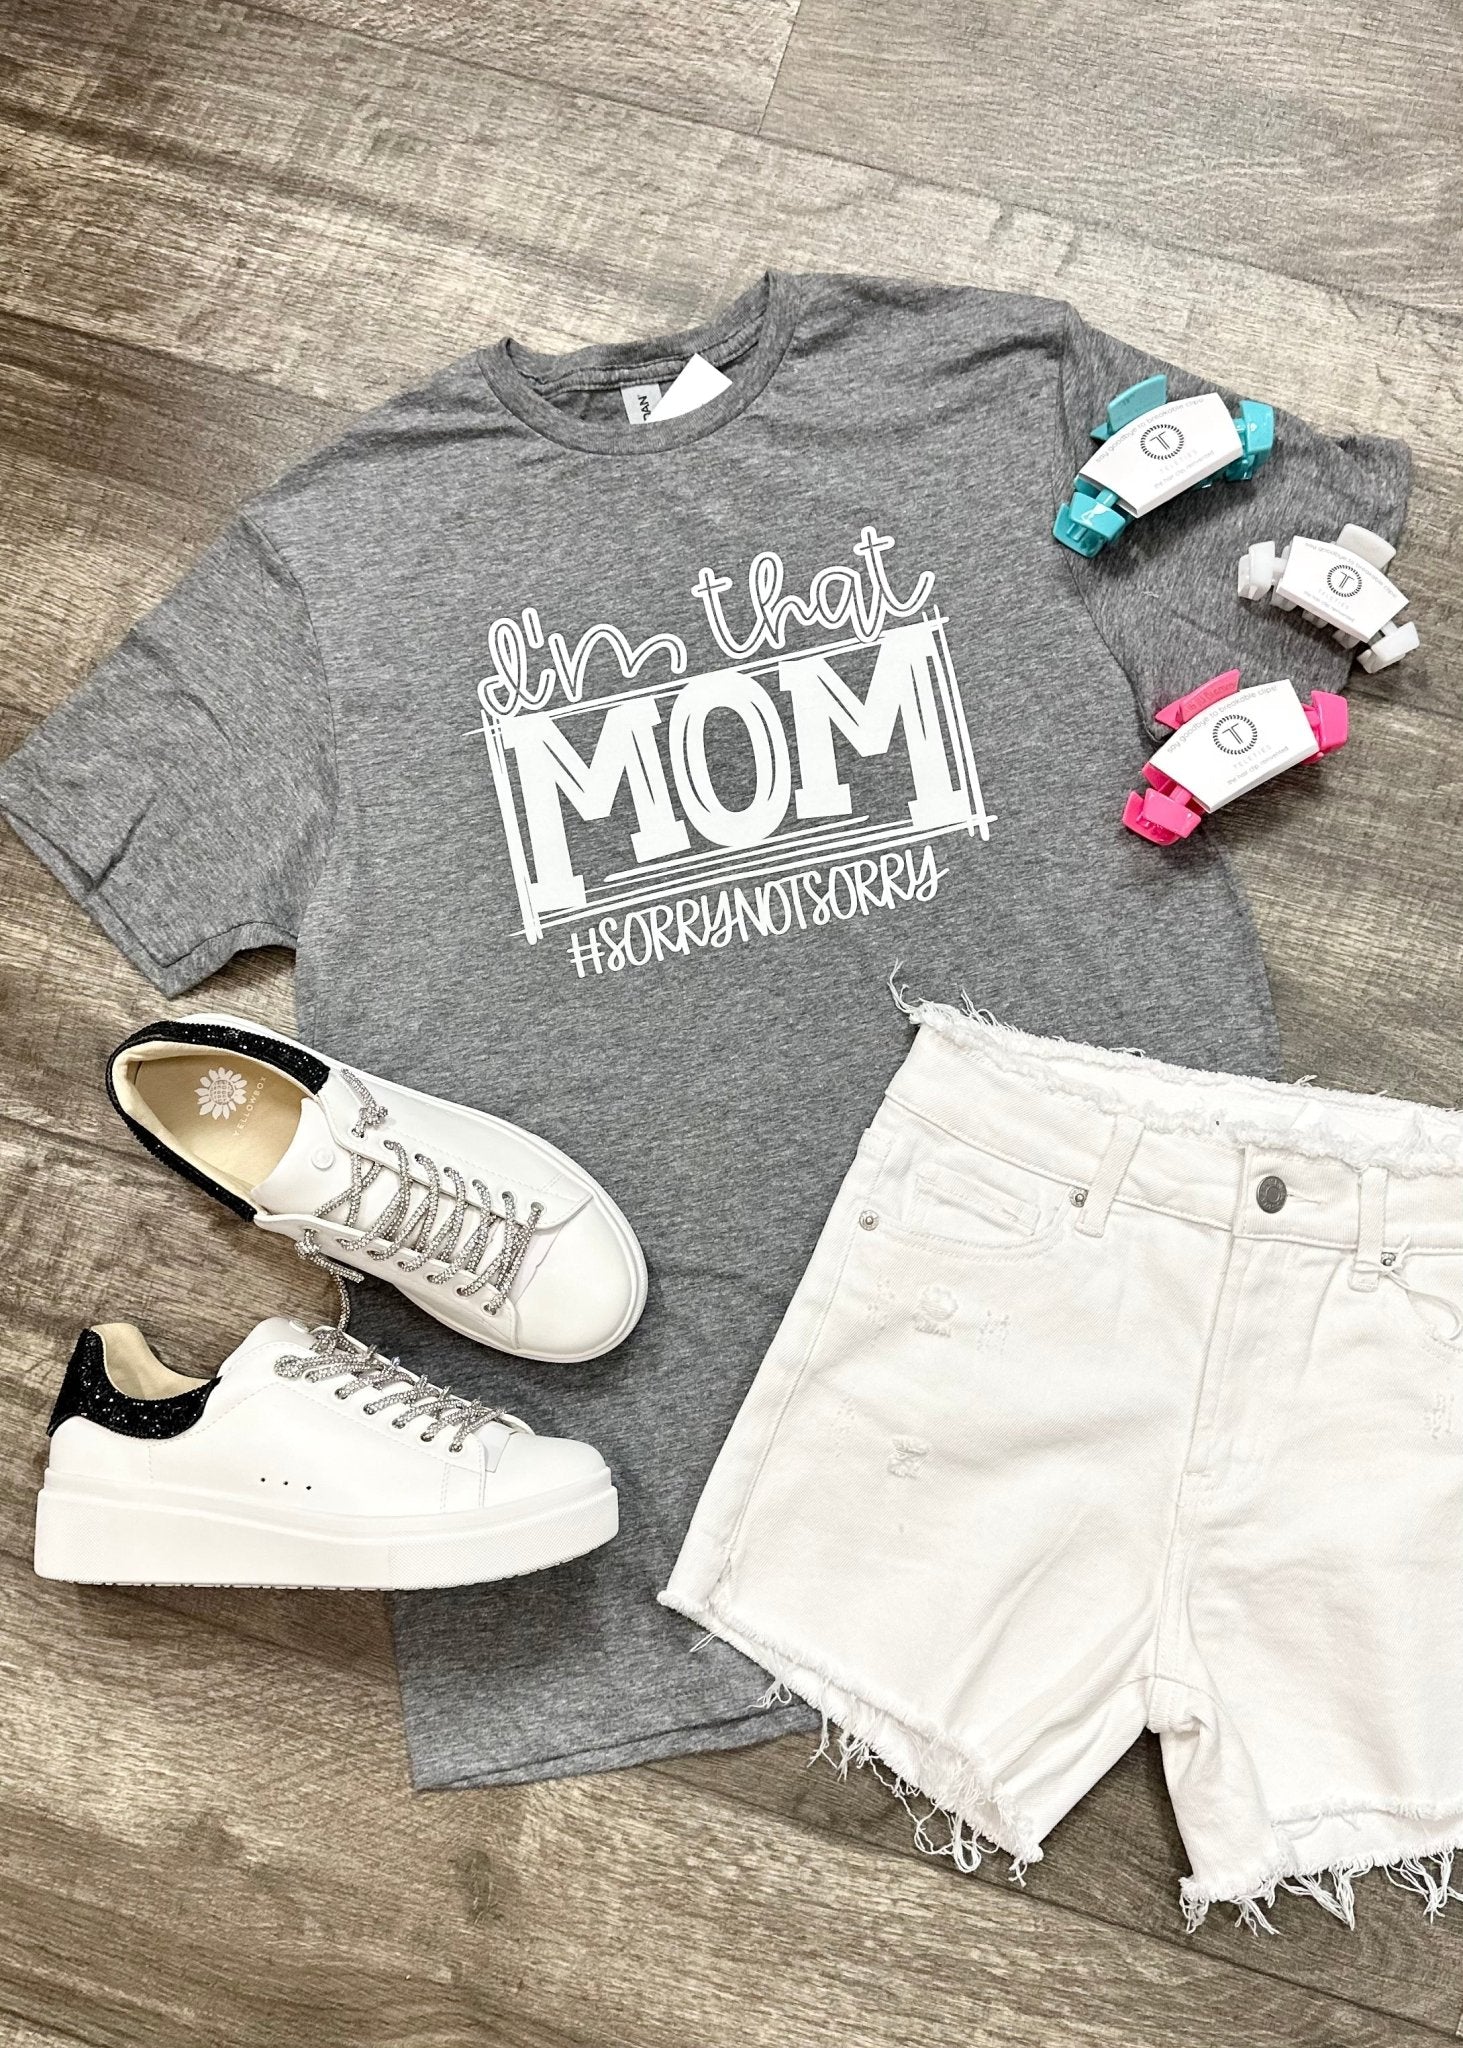 I’m That Mom Graphic Tee - Jimberly's Boutique